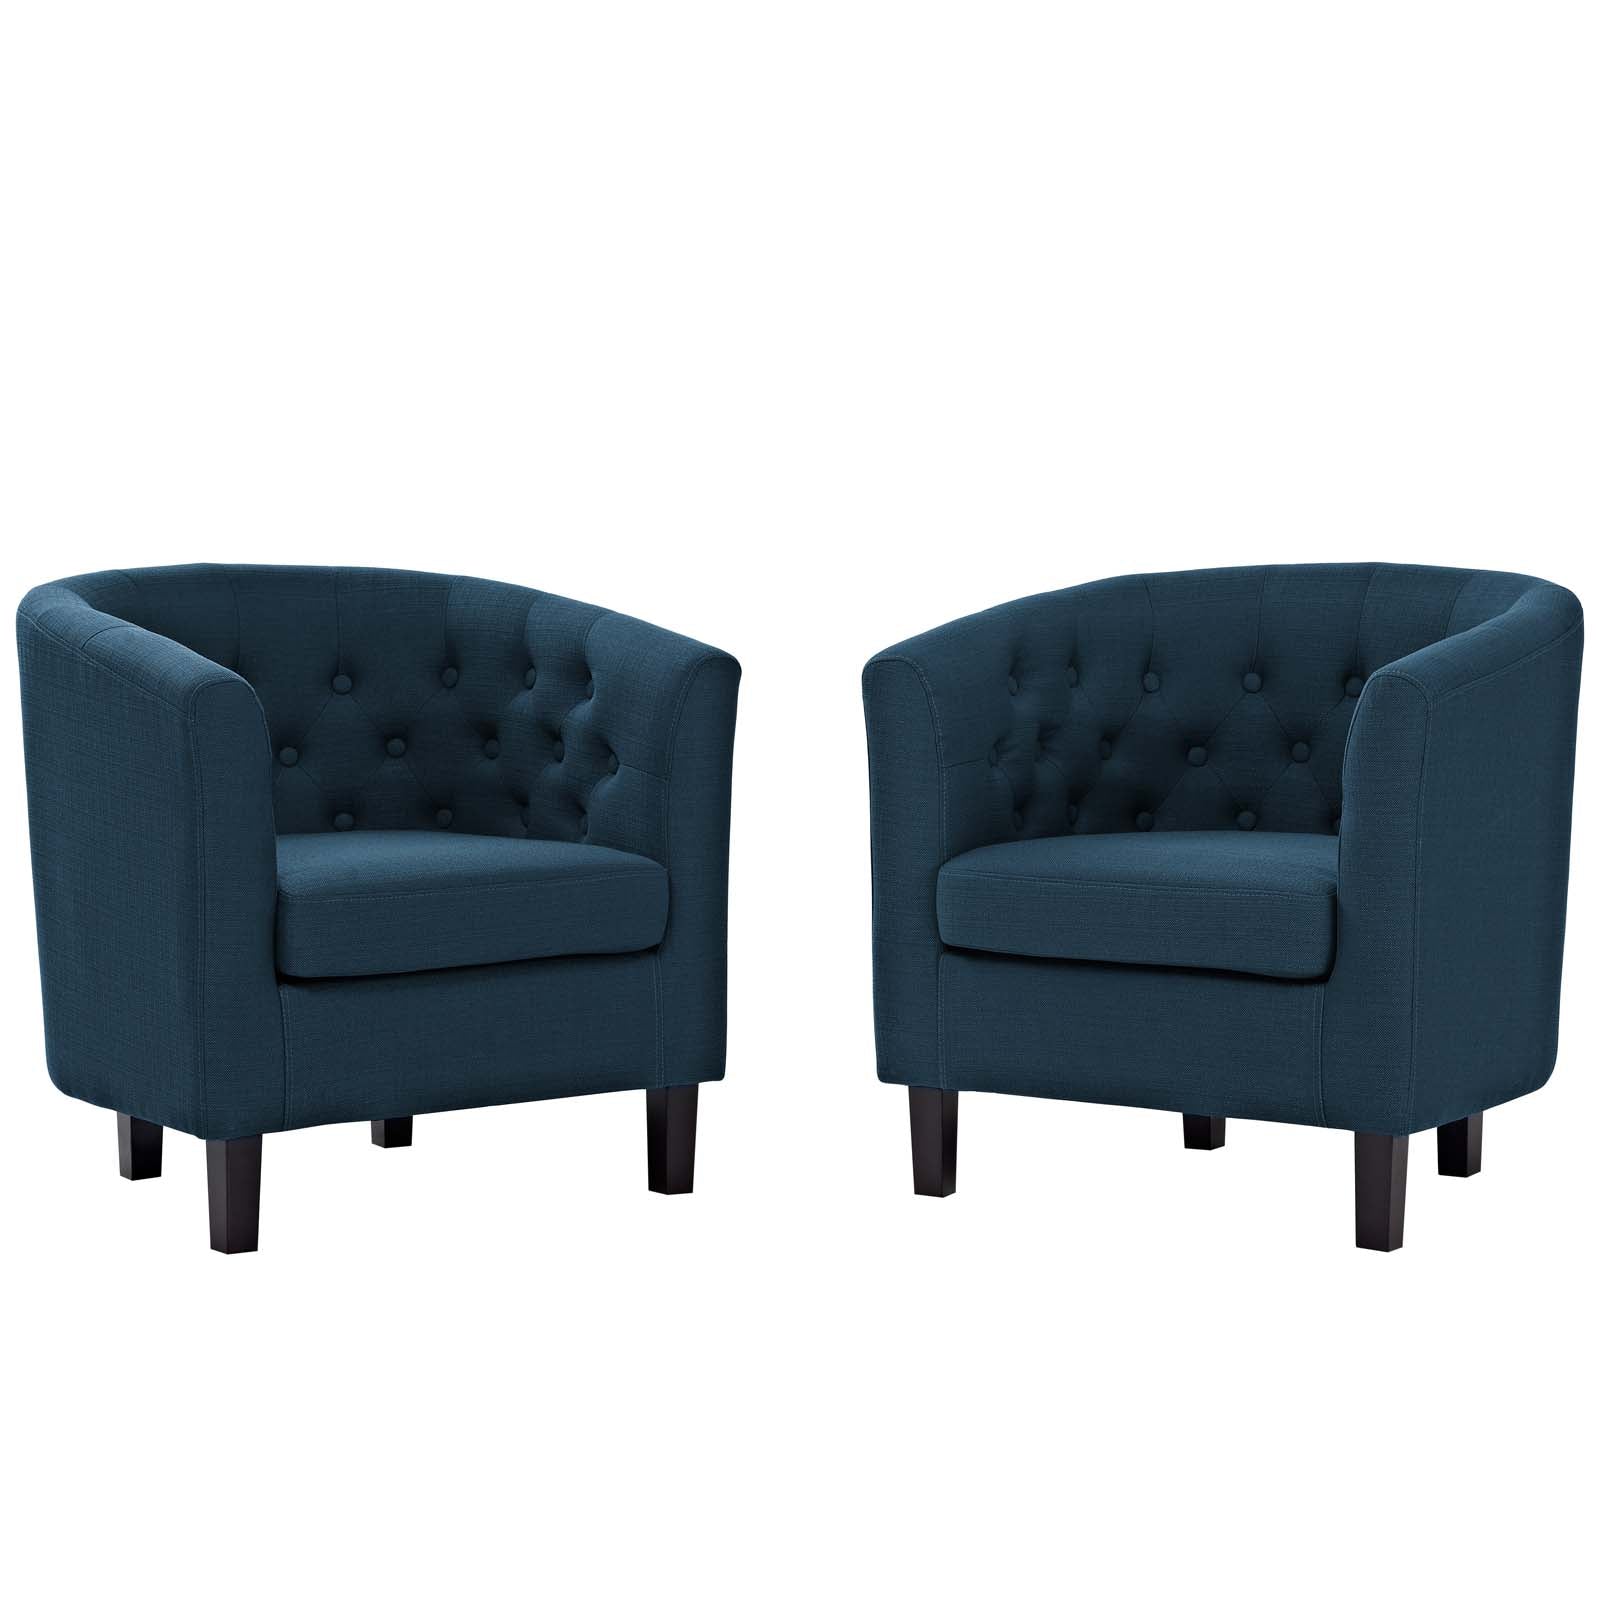 Modway Living Room Sets - Prospect 2 Piece Upholstered Fabric Armchair Set Azure